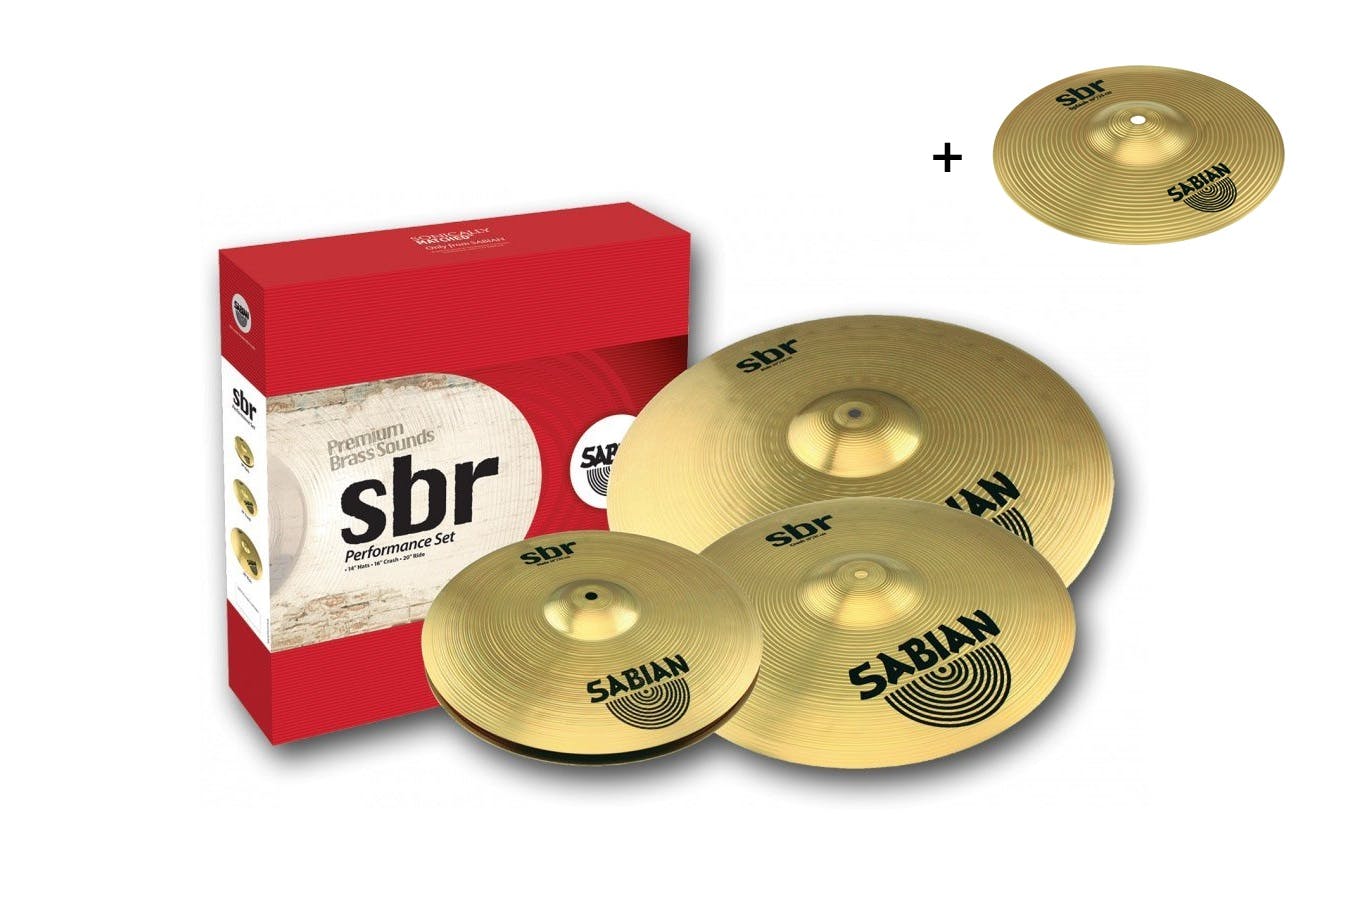 21406X Sabian Cymbal Variety Package 